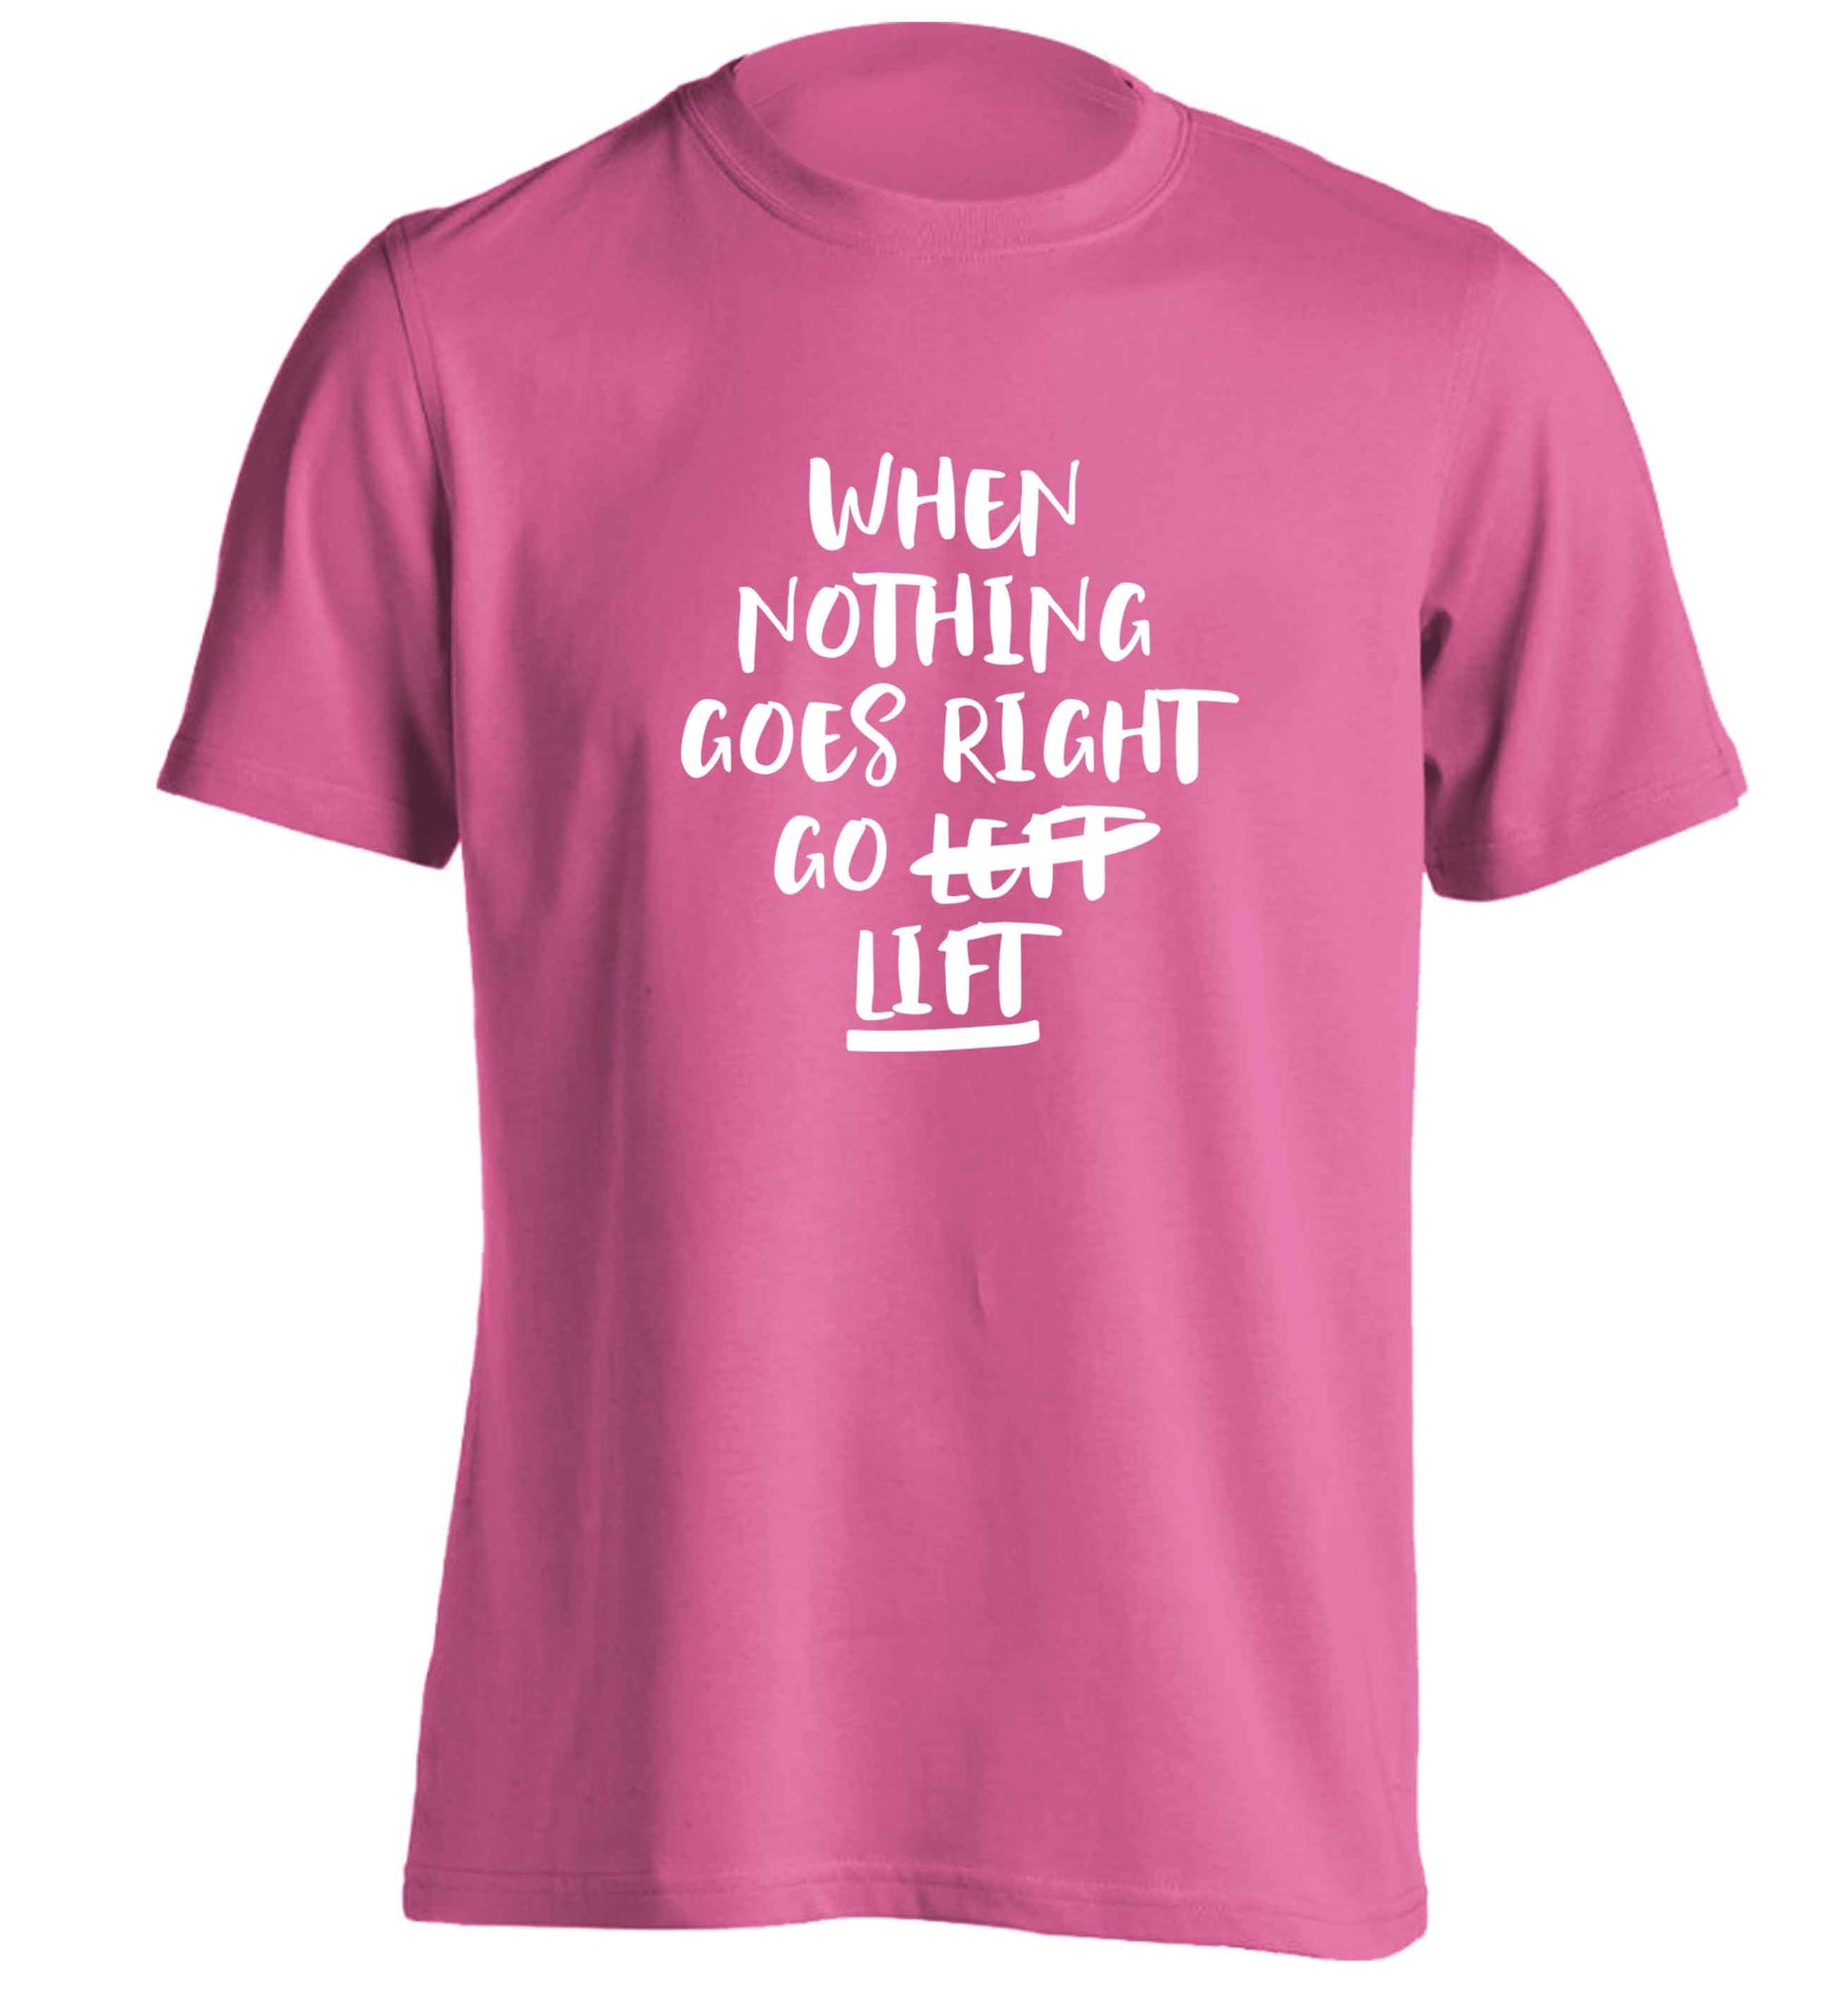 When nothing goes right go lift adults unisex pink Tshirt 2XL